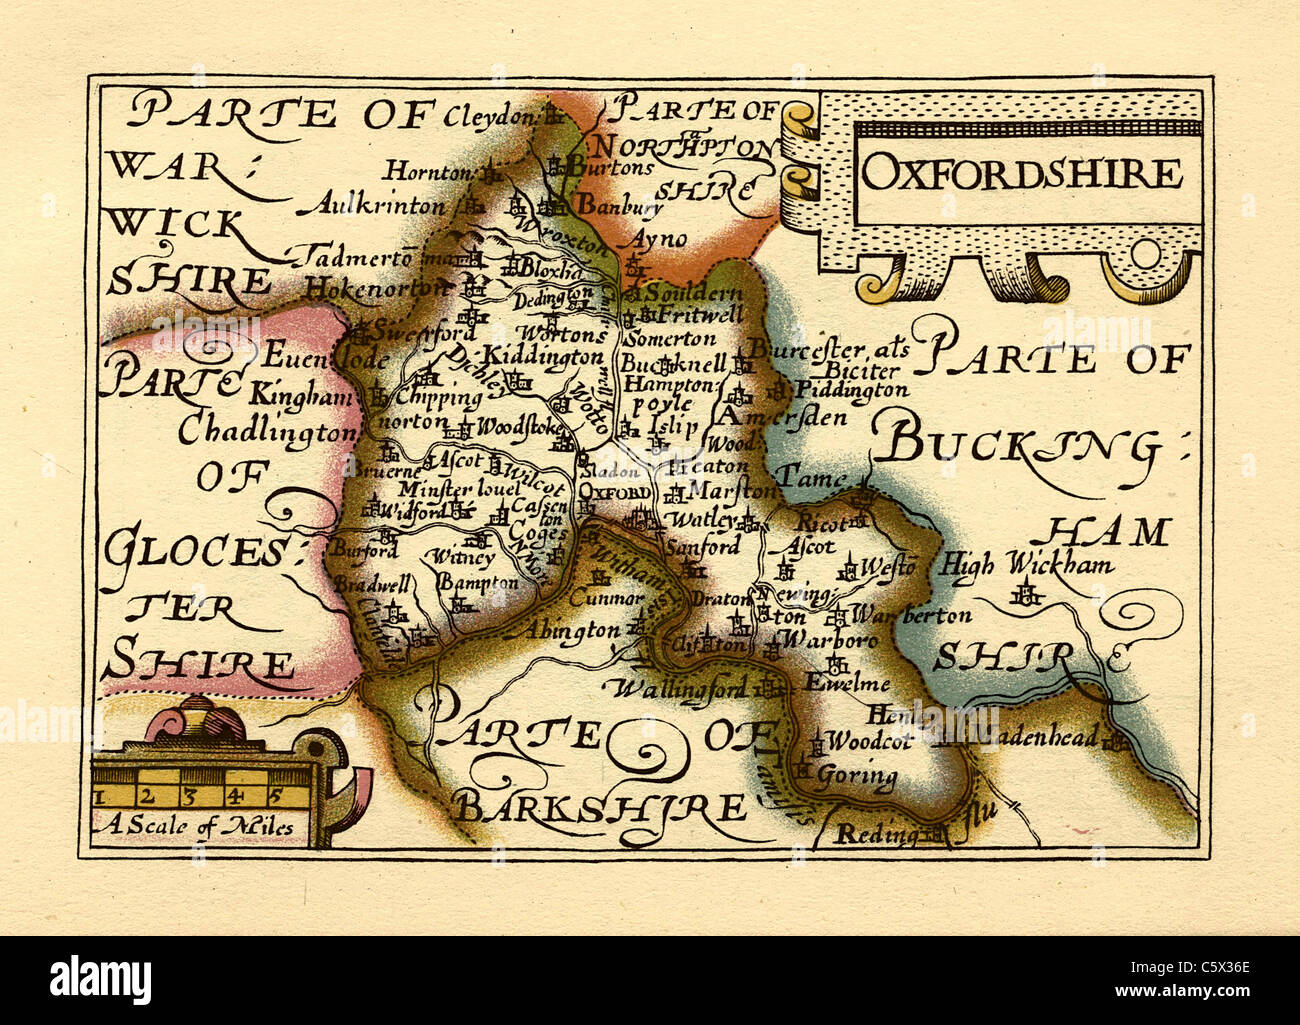 Oxfordshire - Old English County Map by John Speed, circa 1625 Stock Photo